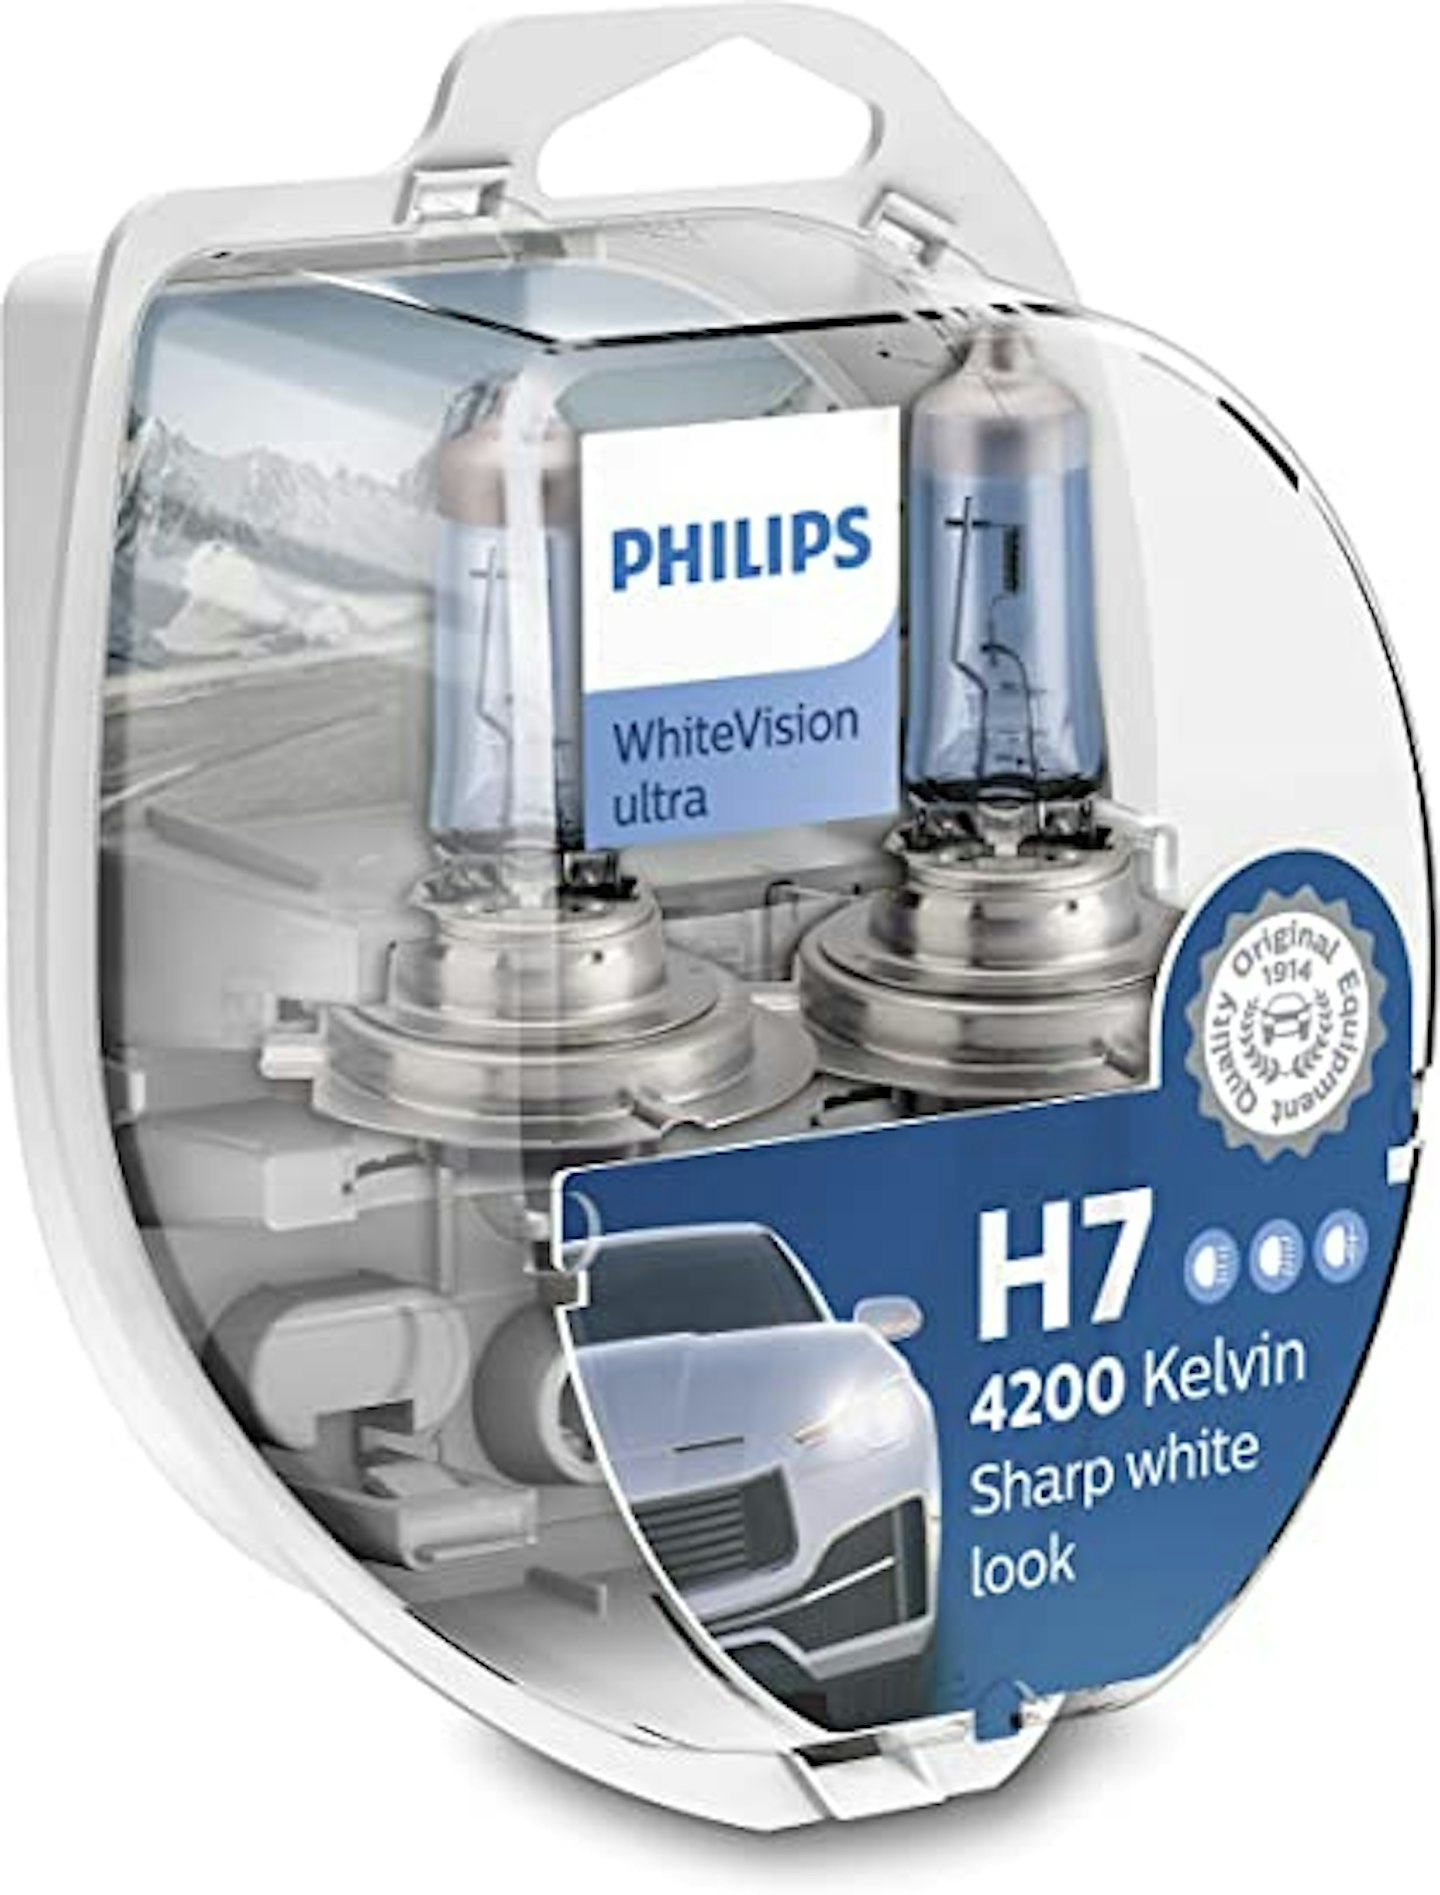 Philips WhiteVision ultra